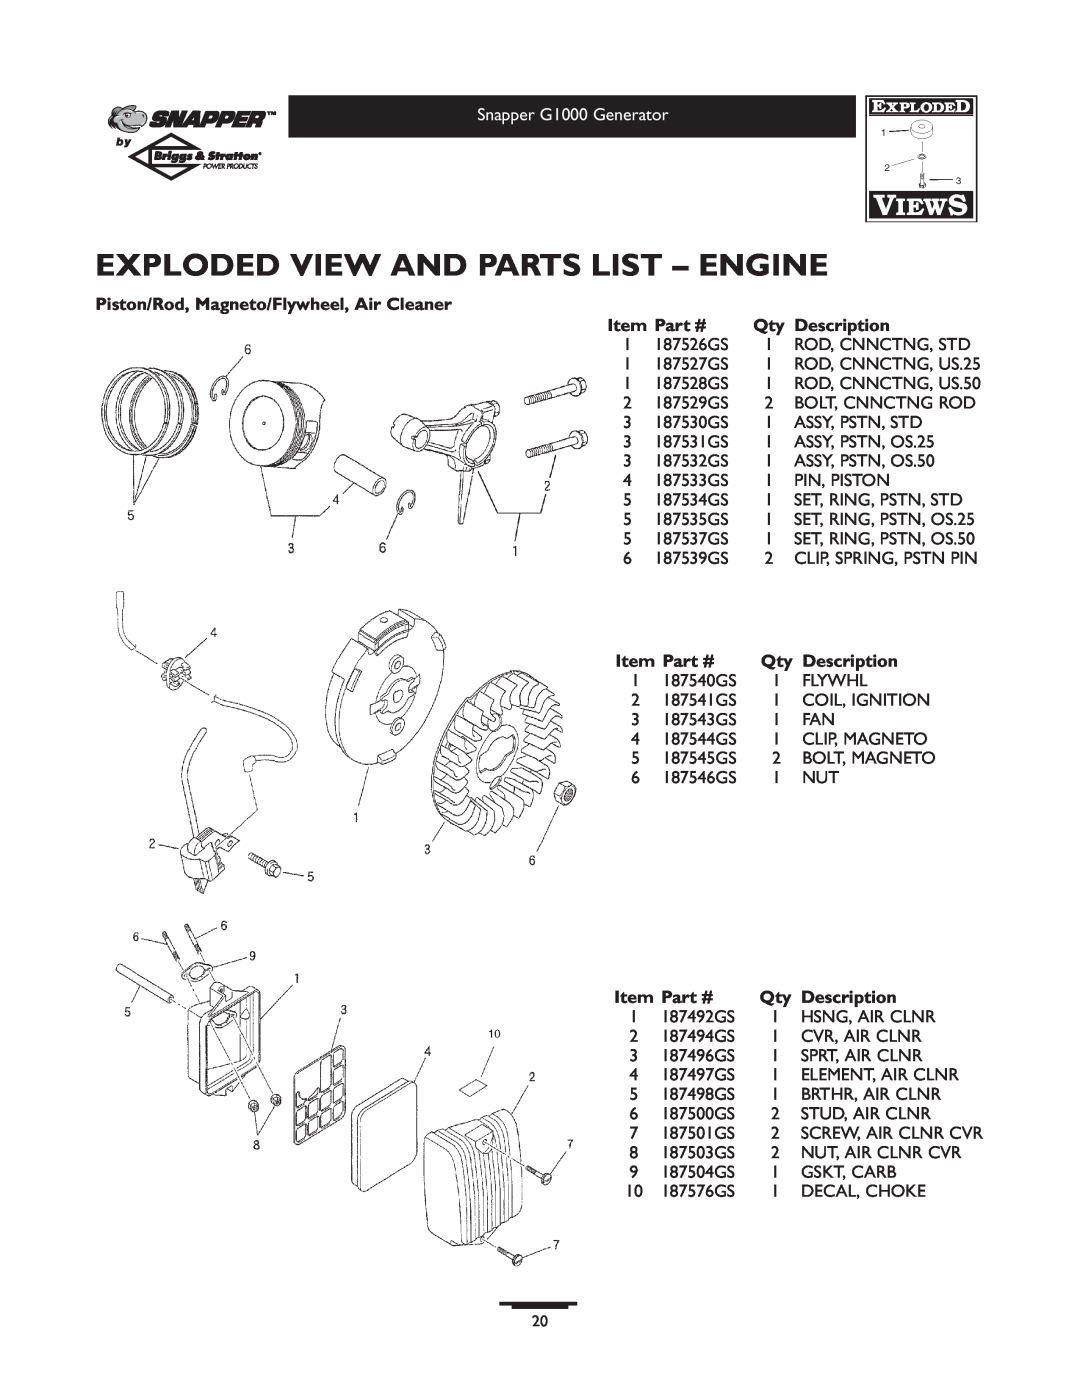 Snapper 1666-0 Exploded View And Parts List - Engine, ROD, CNNCTNG, US.25, ROD, CNNCTNG, US.50, SET, RING, PSTN, OS.25 